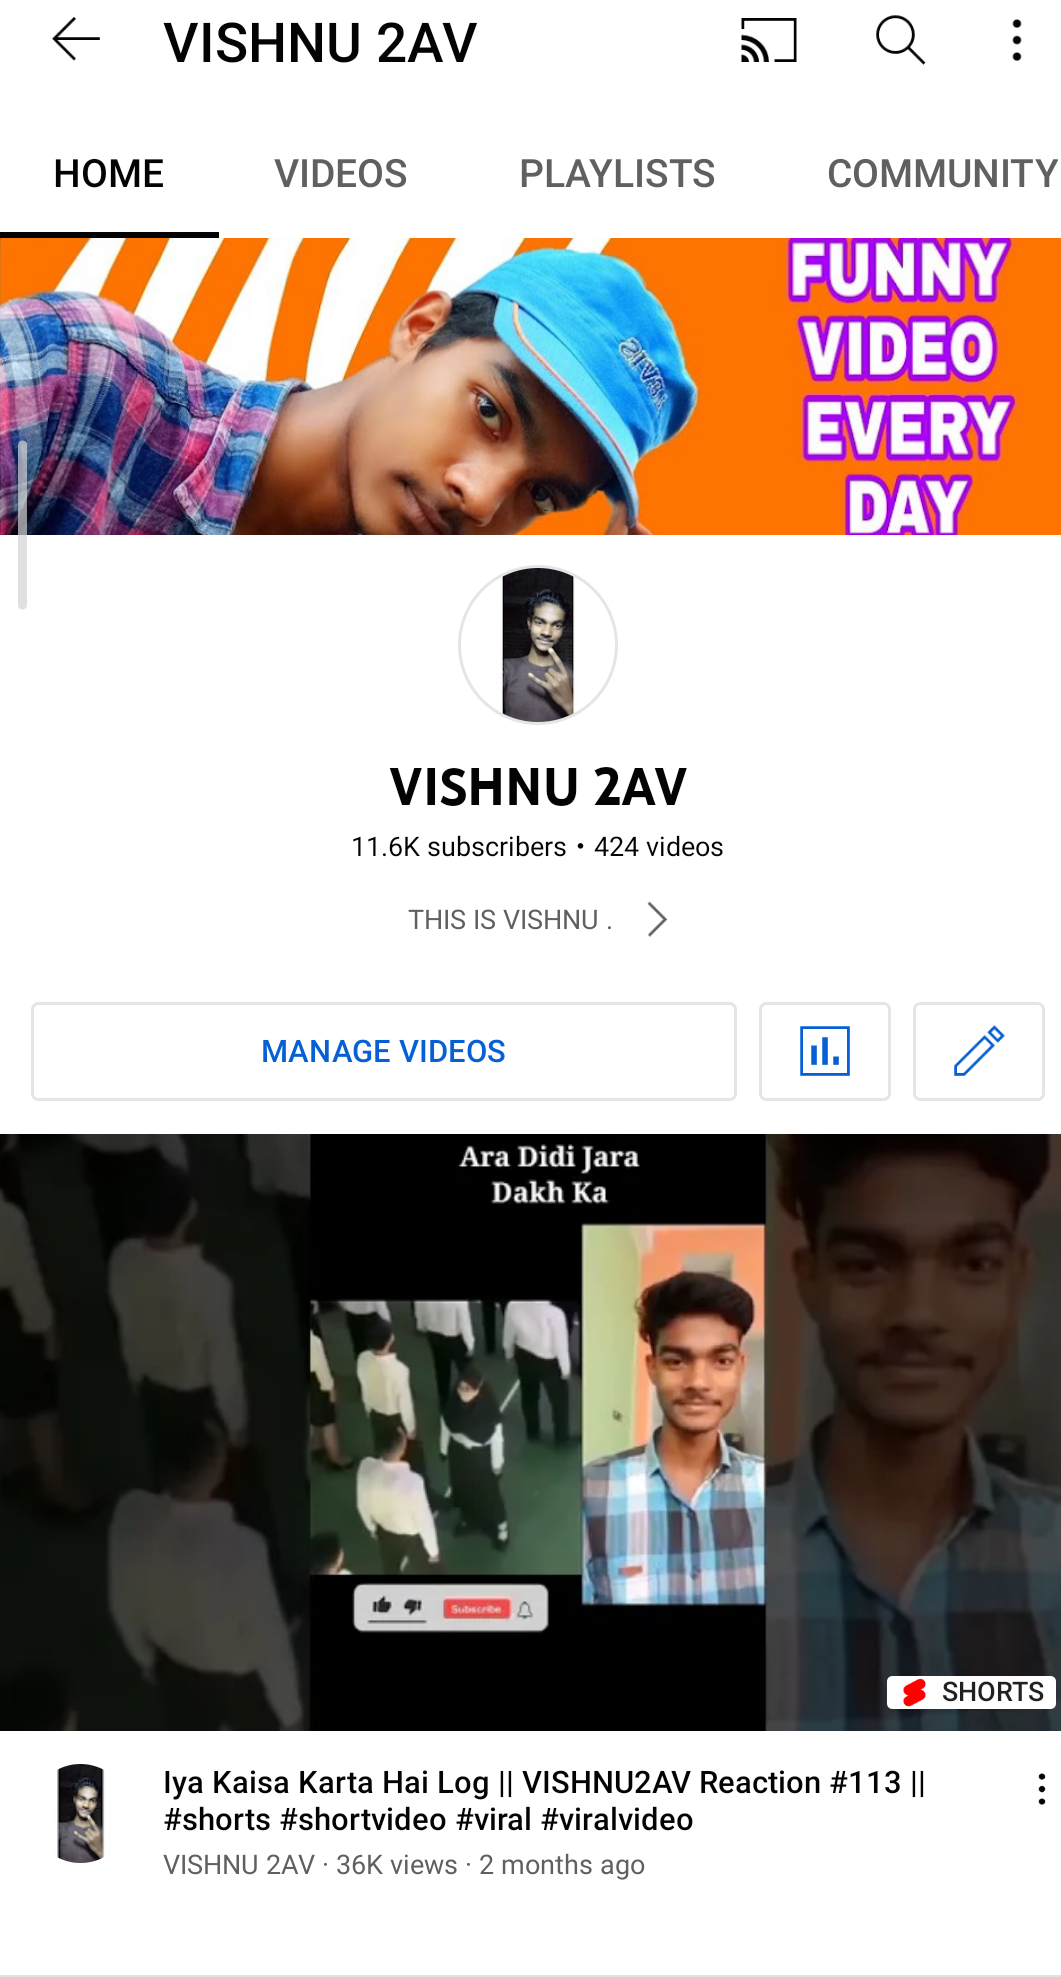 Sir I have completed my 10k subscriber on my channel on 18 July 2022 but i  can't get story tab - YouTube Community